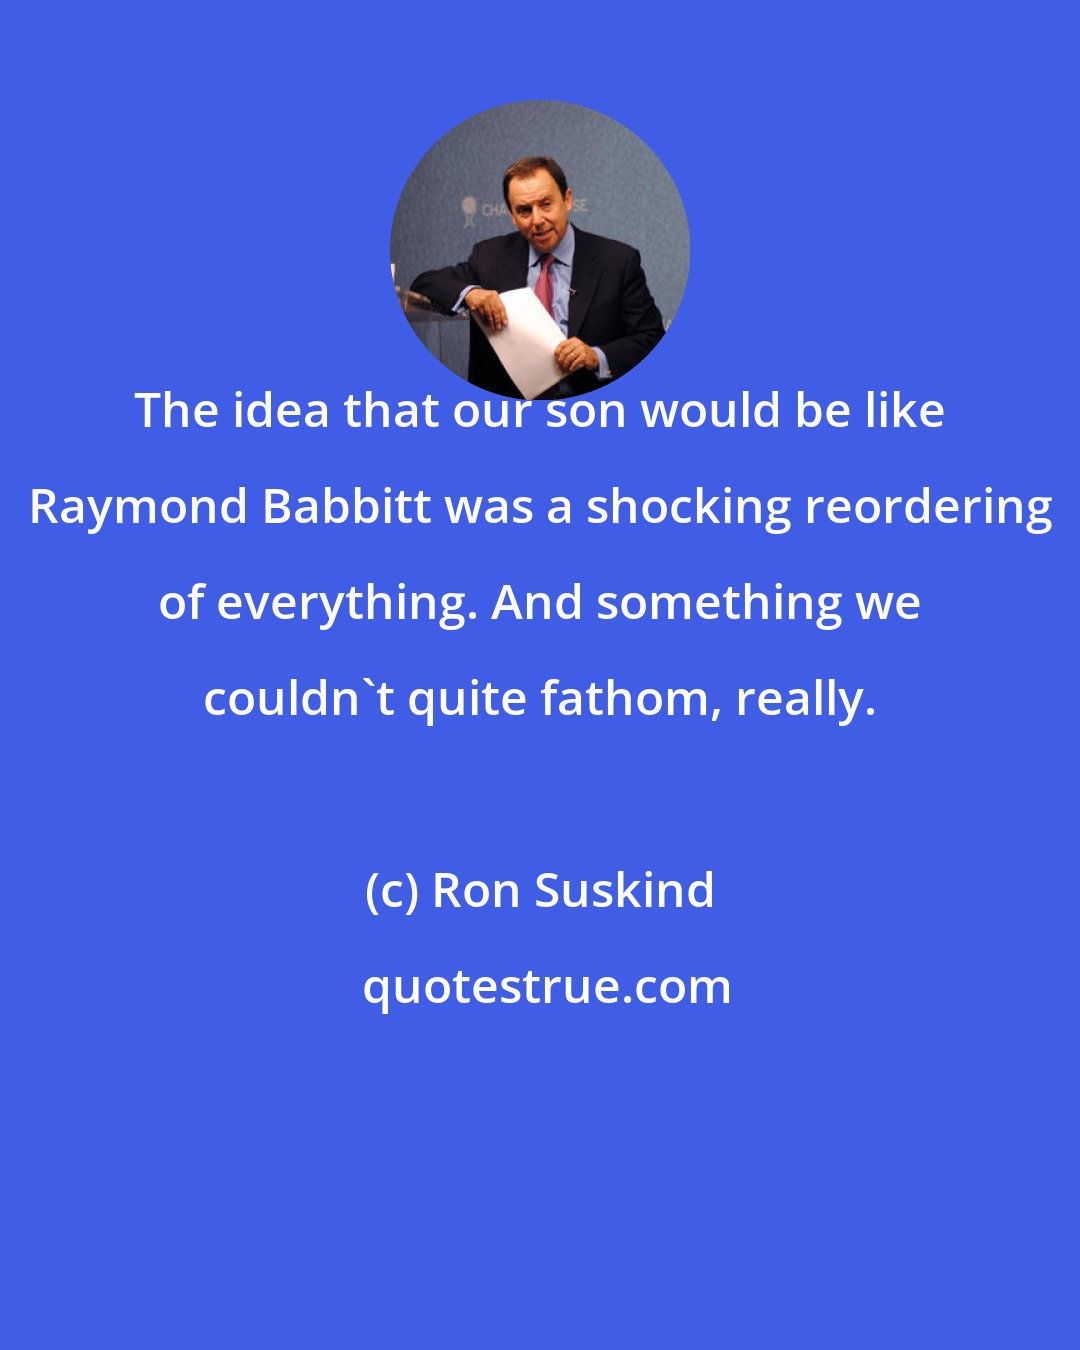 Ron Suskind: The idea that our son would be like Raymond Babbitt was a shocking reordering of everything. And something we couldn't quite fathom, really.